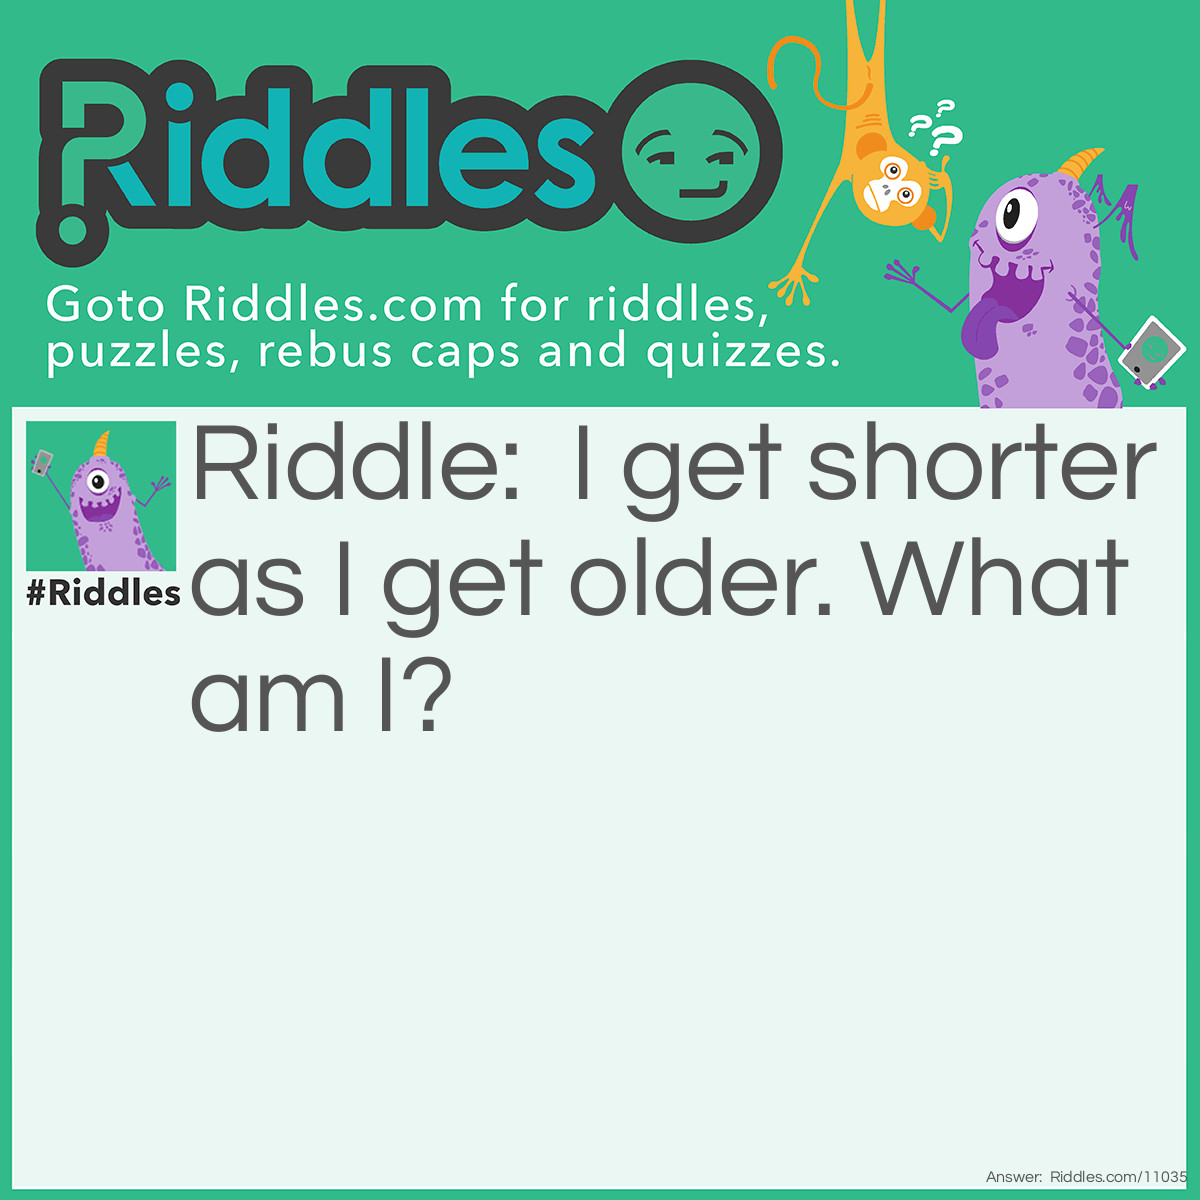 Riddle: I get shorter as I get older. What am I? Answer: A candle.